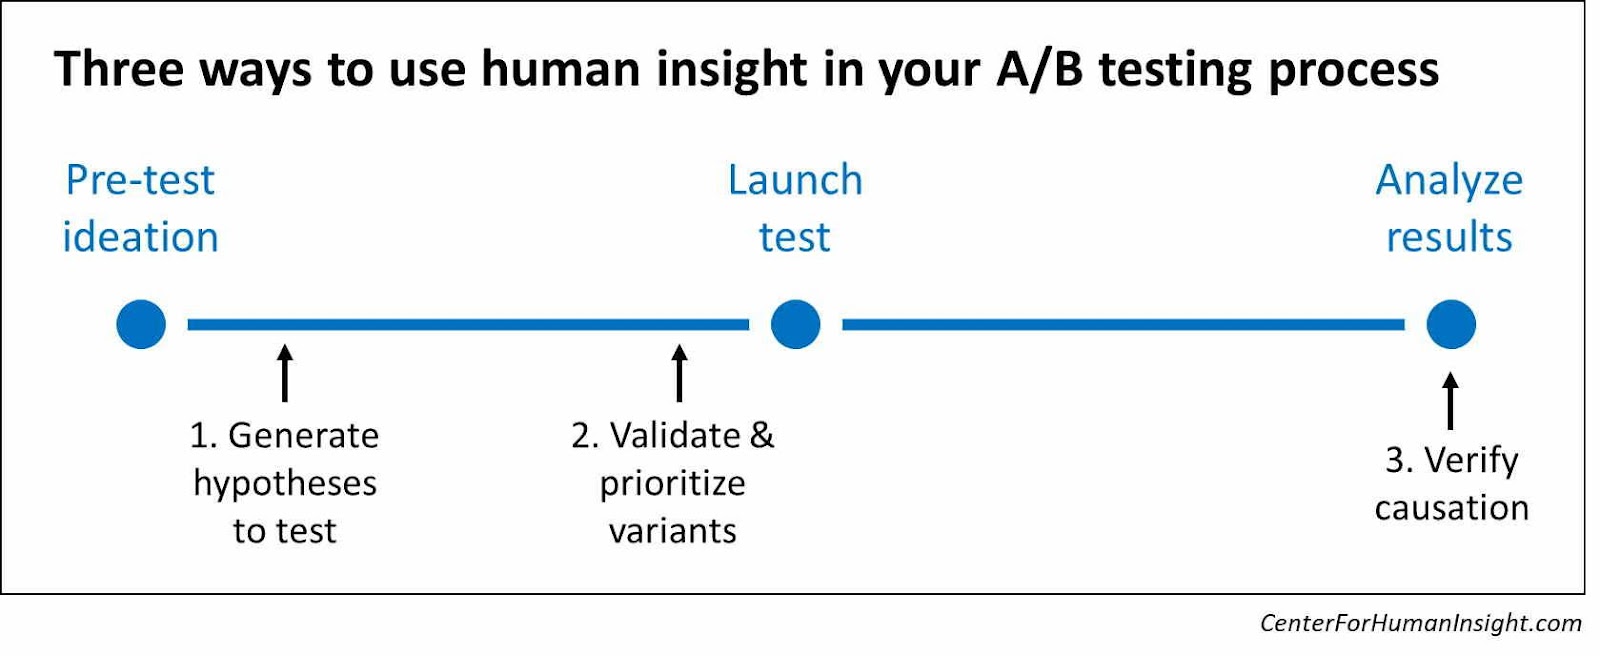 We recommend using human insight at three points in the A/B testing process: First, very early, to generate hypotheses to test. Second, just before you launch the test, to prioritize and validate the variants. And third, after testing is complete, to verify causation.